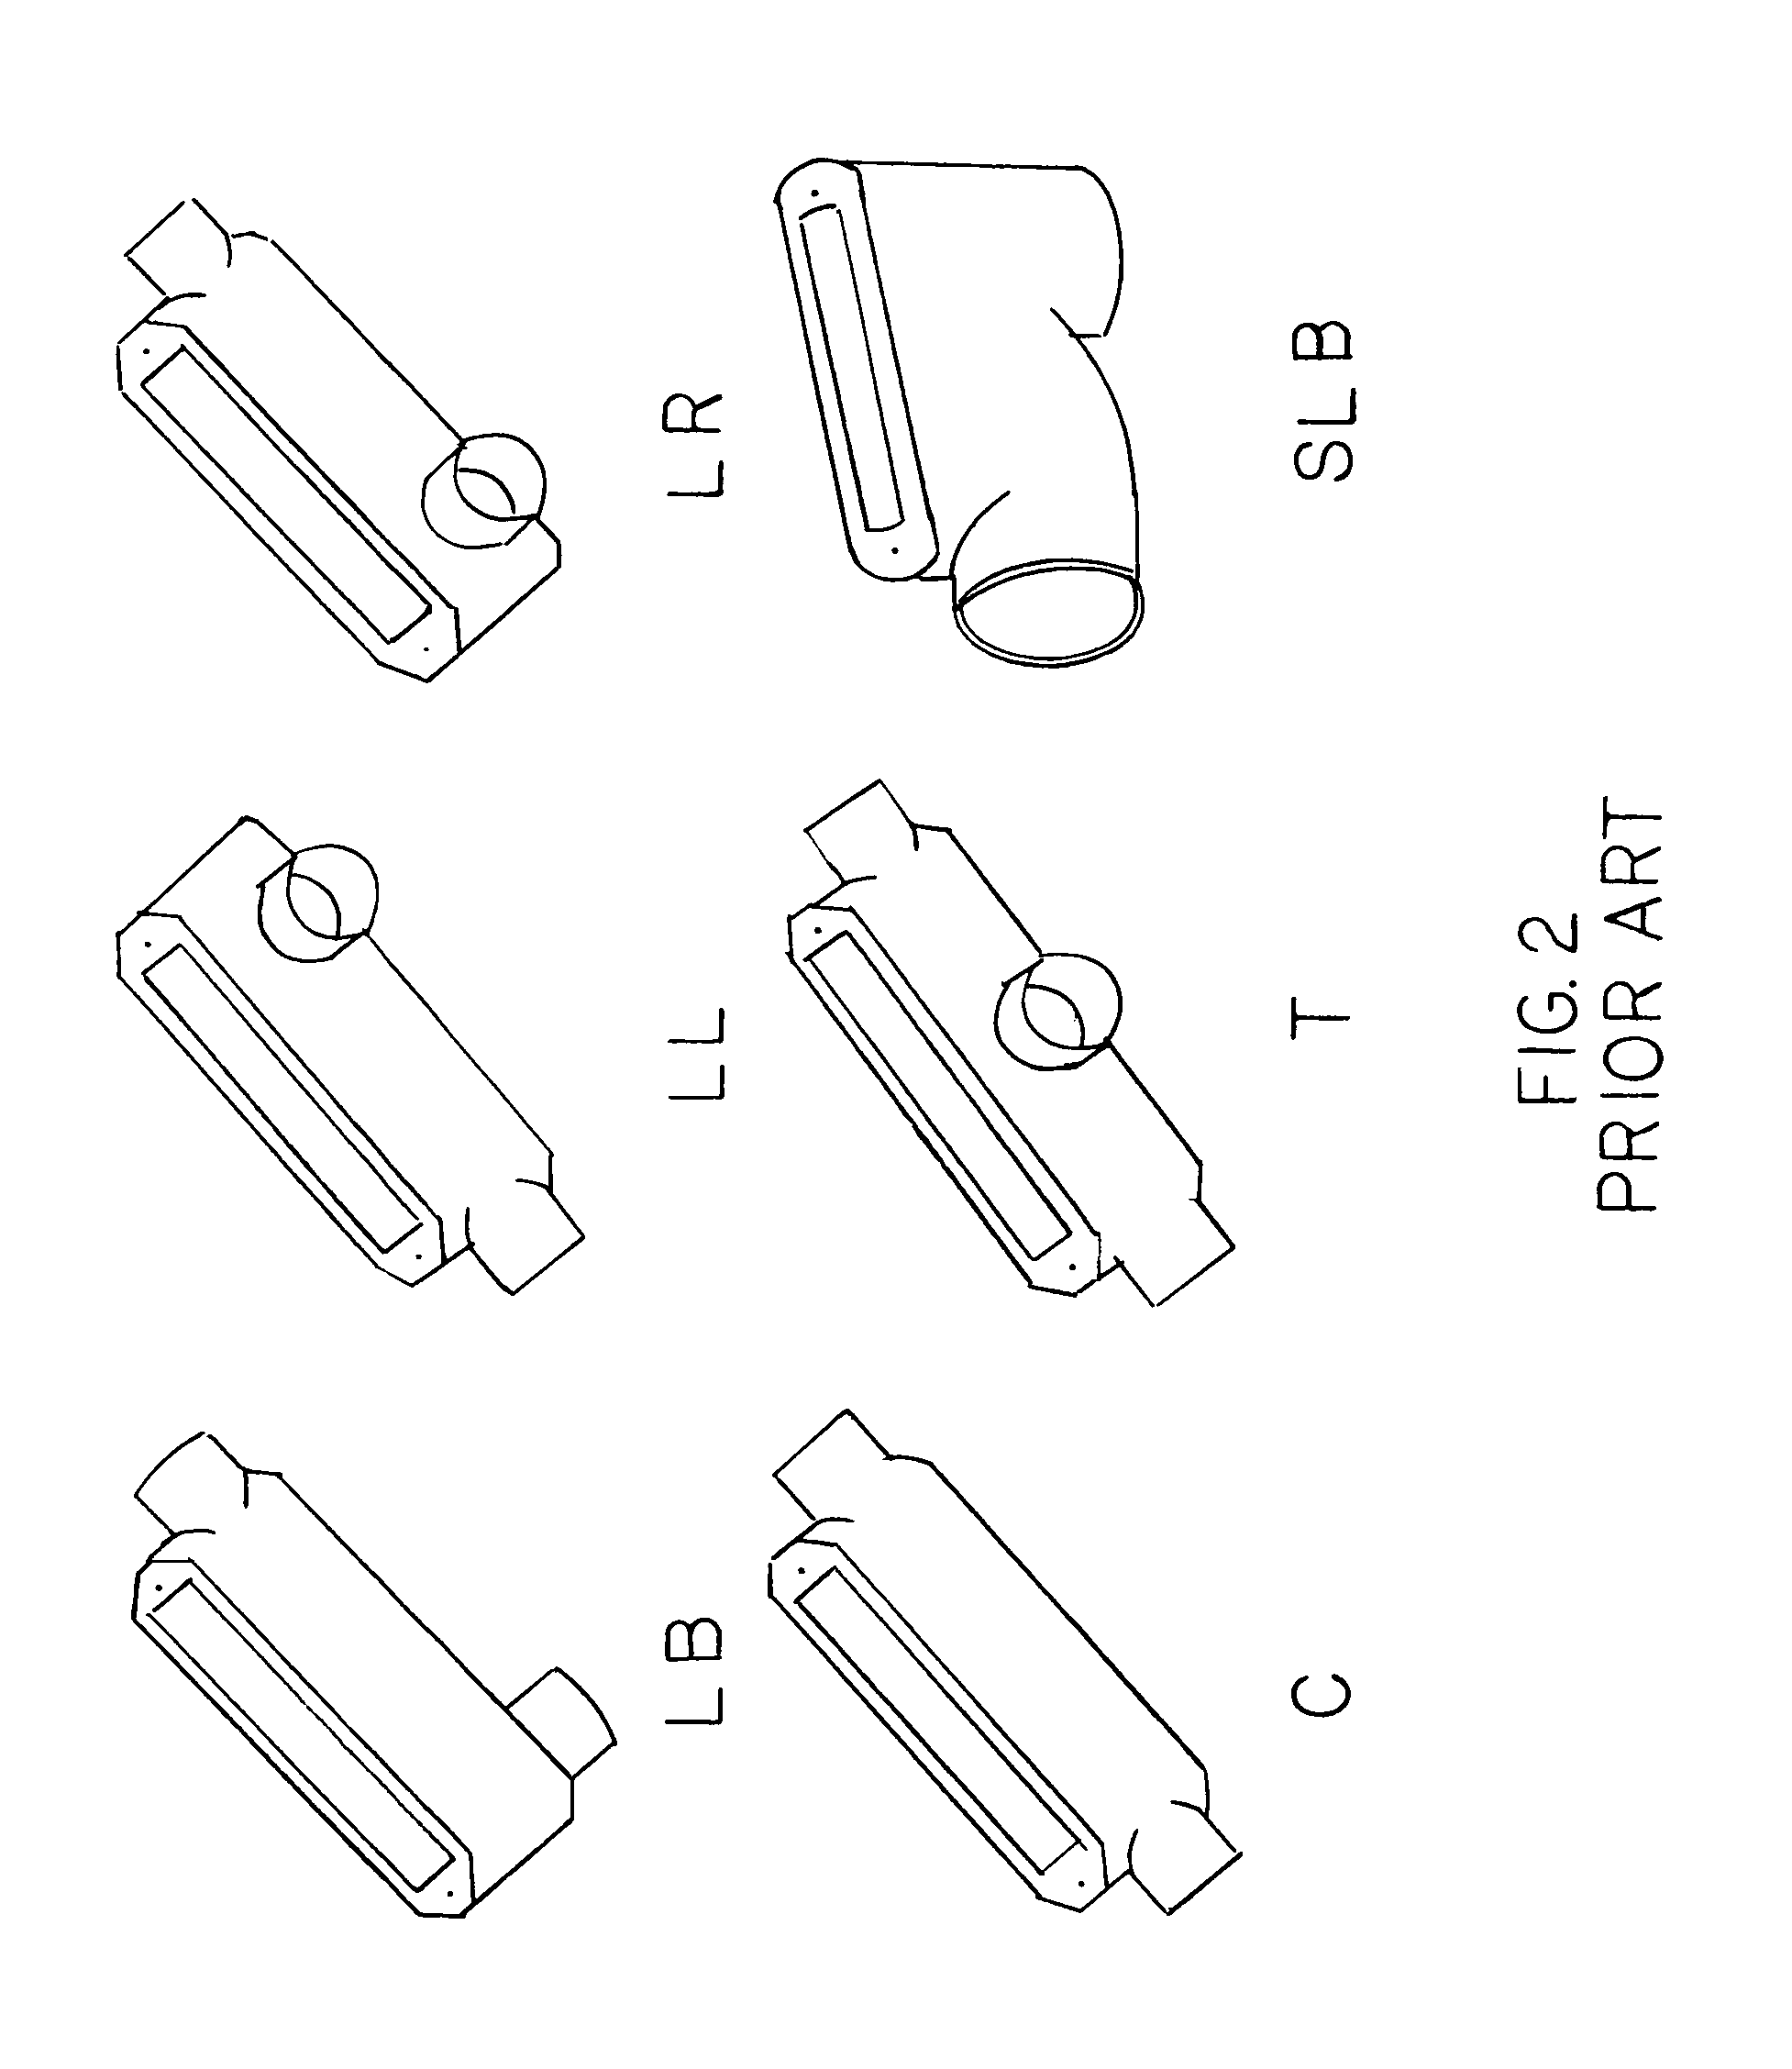 Electrical conduit fitting installation system and method of use